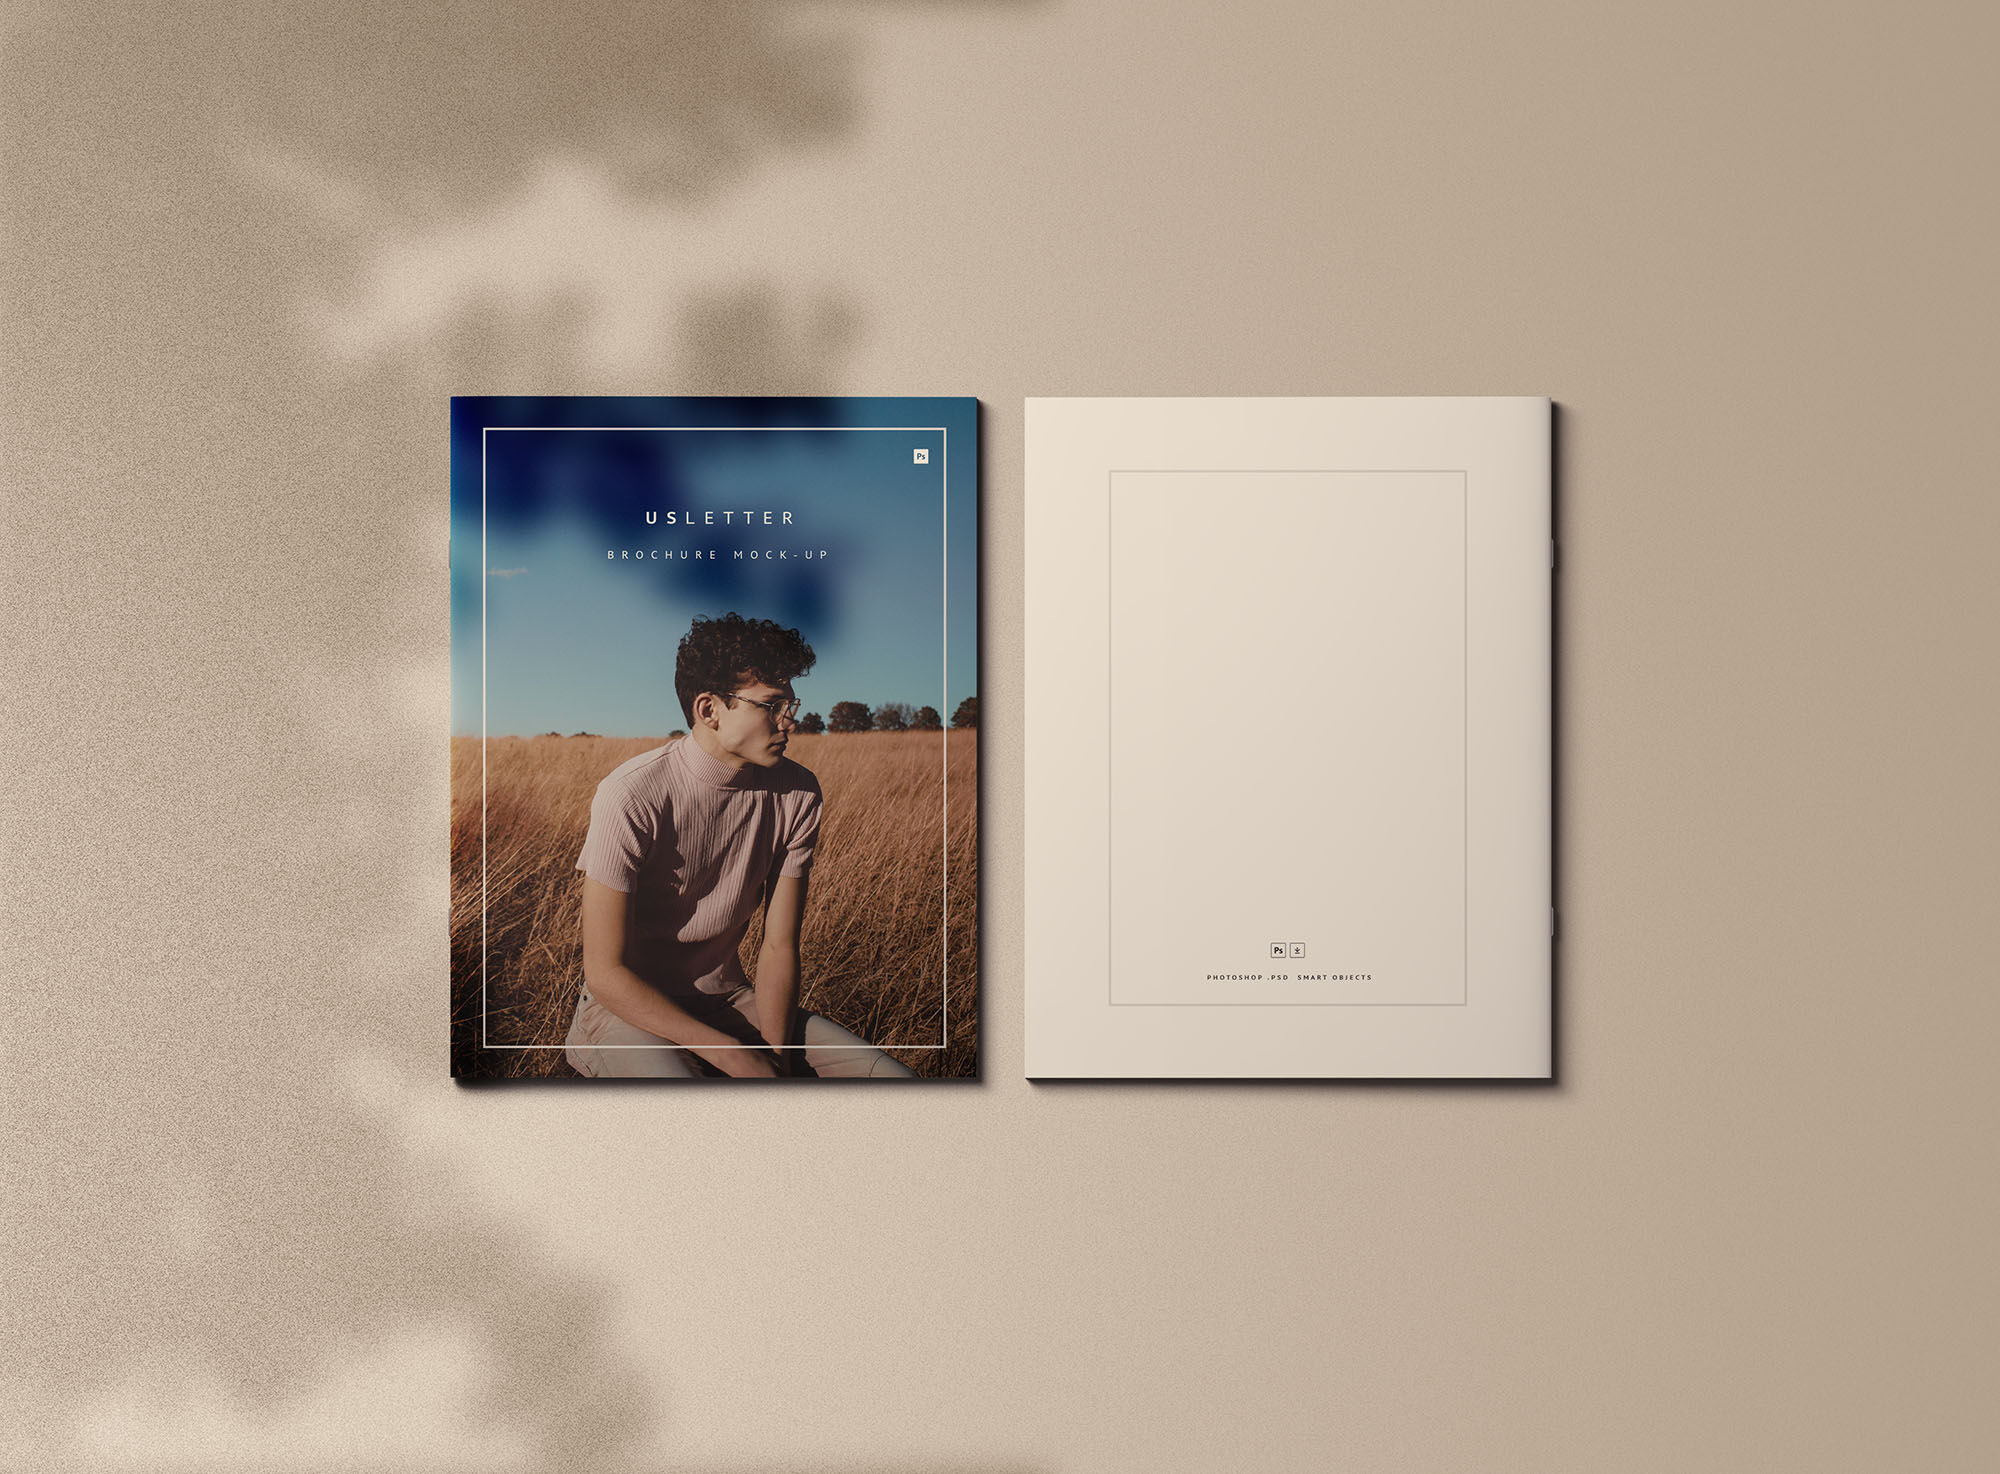 Letter Brochure Cover Mockup With Shadows Overlay FREE PSD